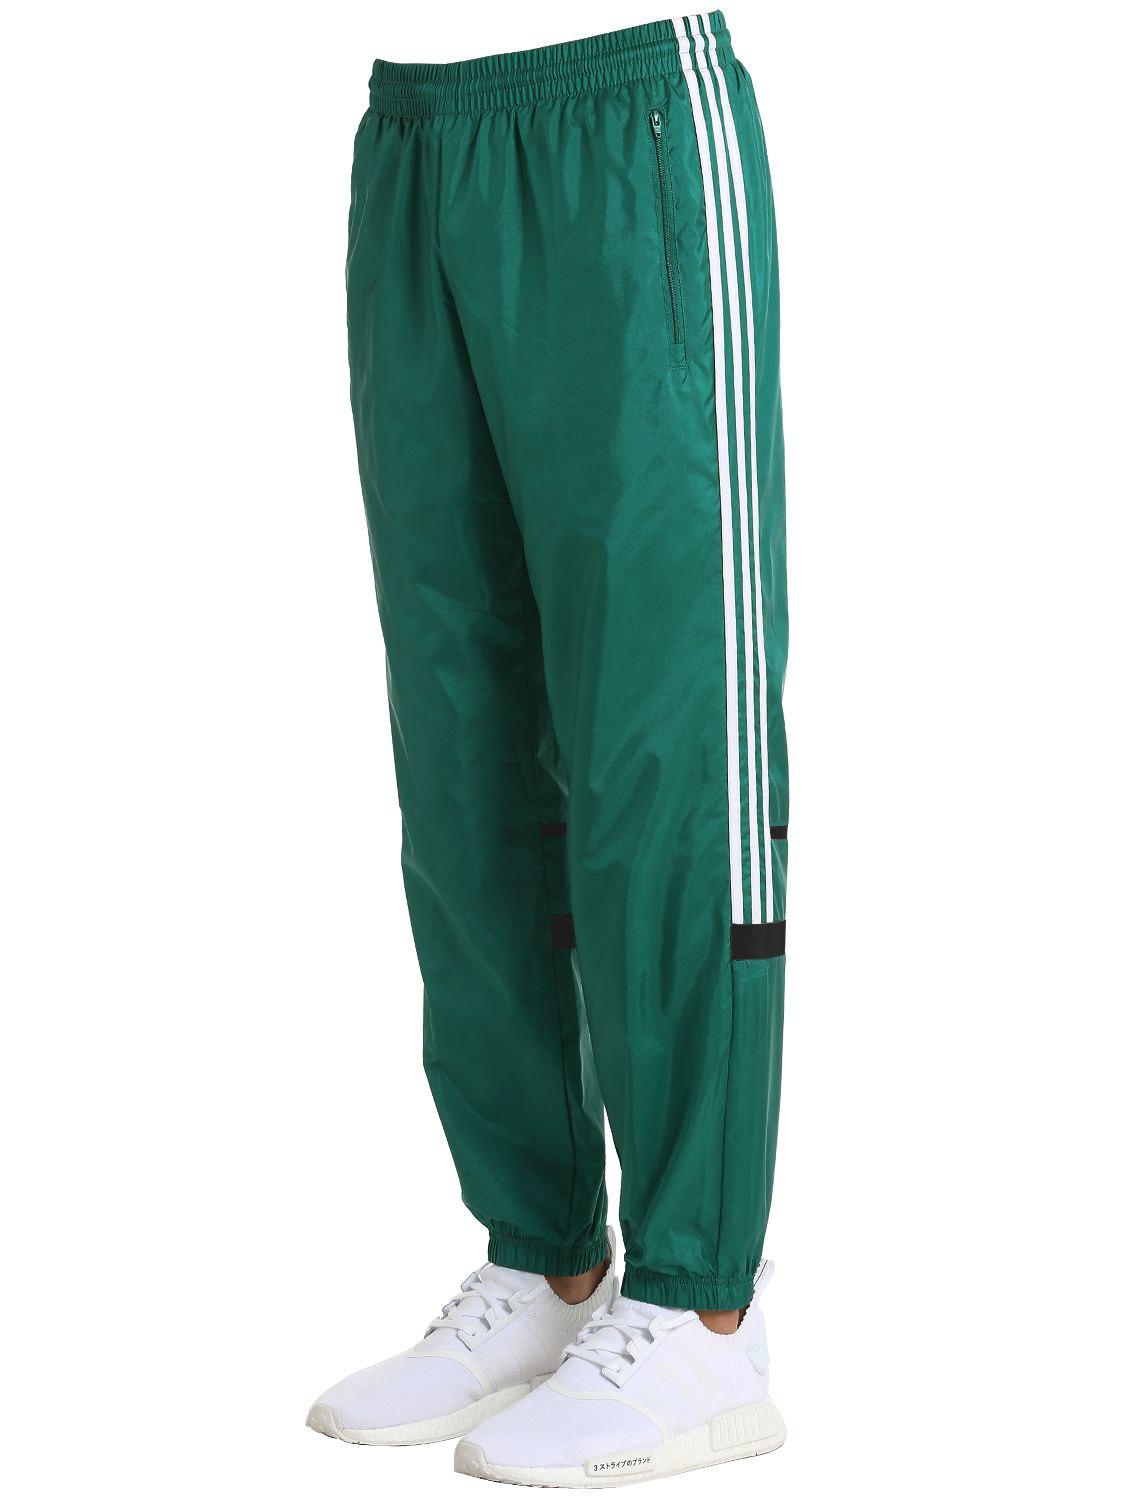 adidas Originals Synthetic Clr-84 Woven Nylon Track Pants in Green for Men  - Lyst